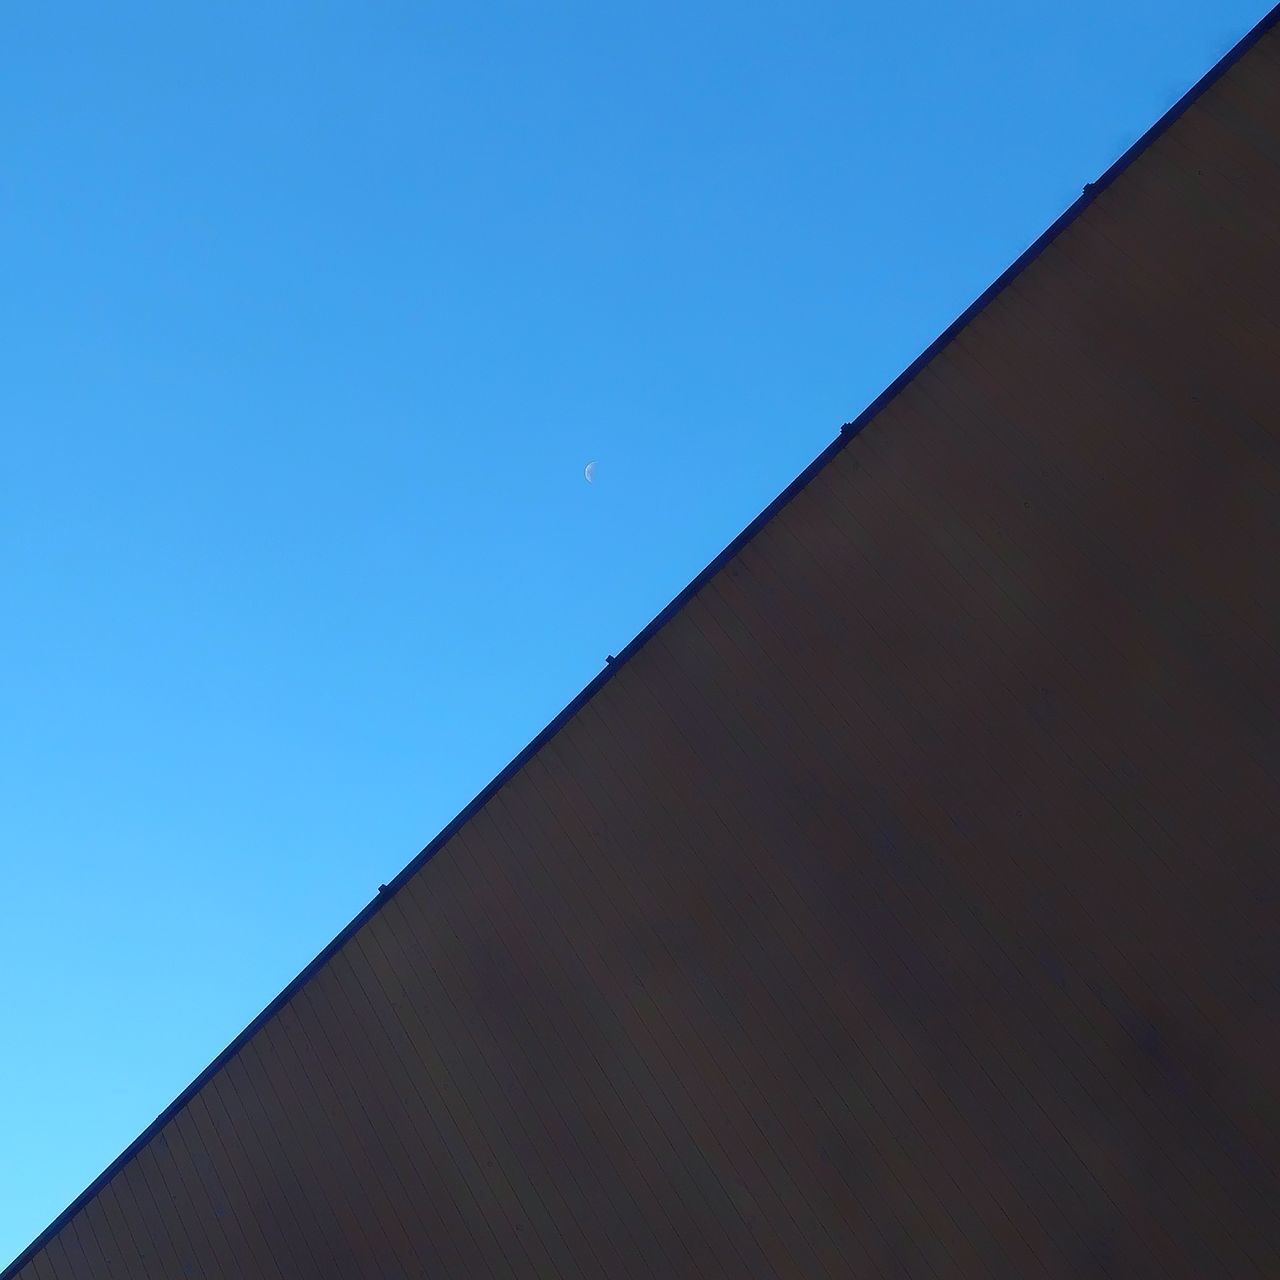 LOW ANGLE VIEW OF ROOF AGAINST CLEAR BLUE SKY AGAINST THE BACKGROUND